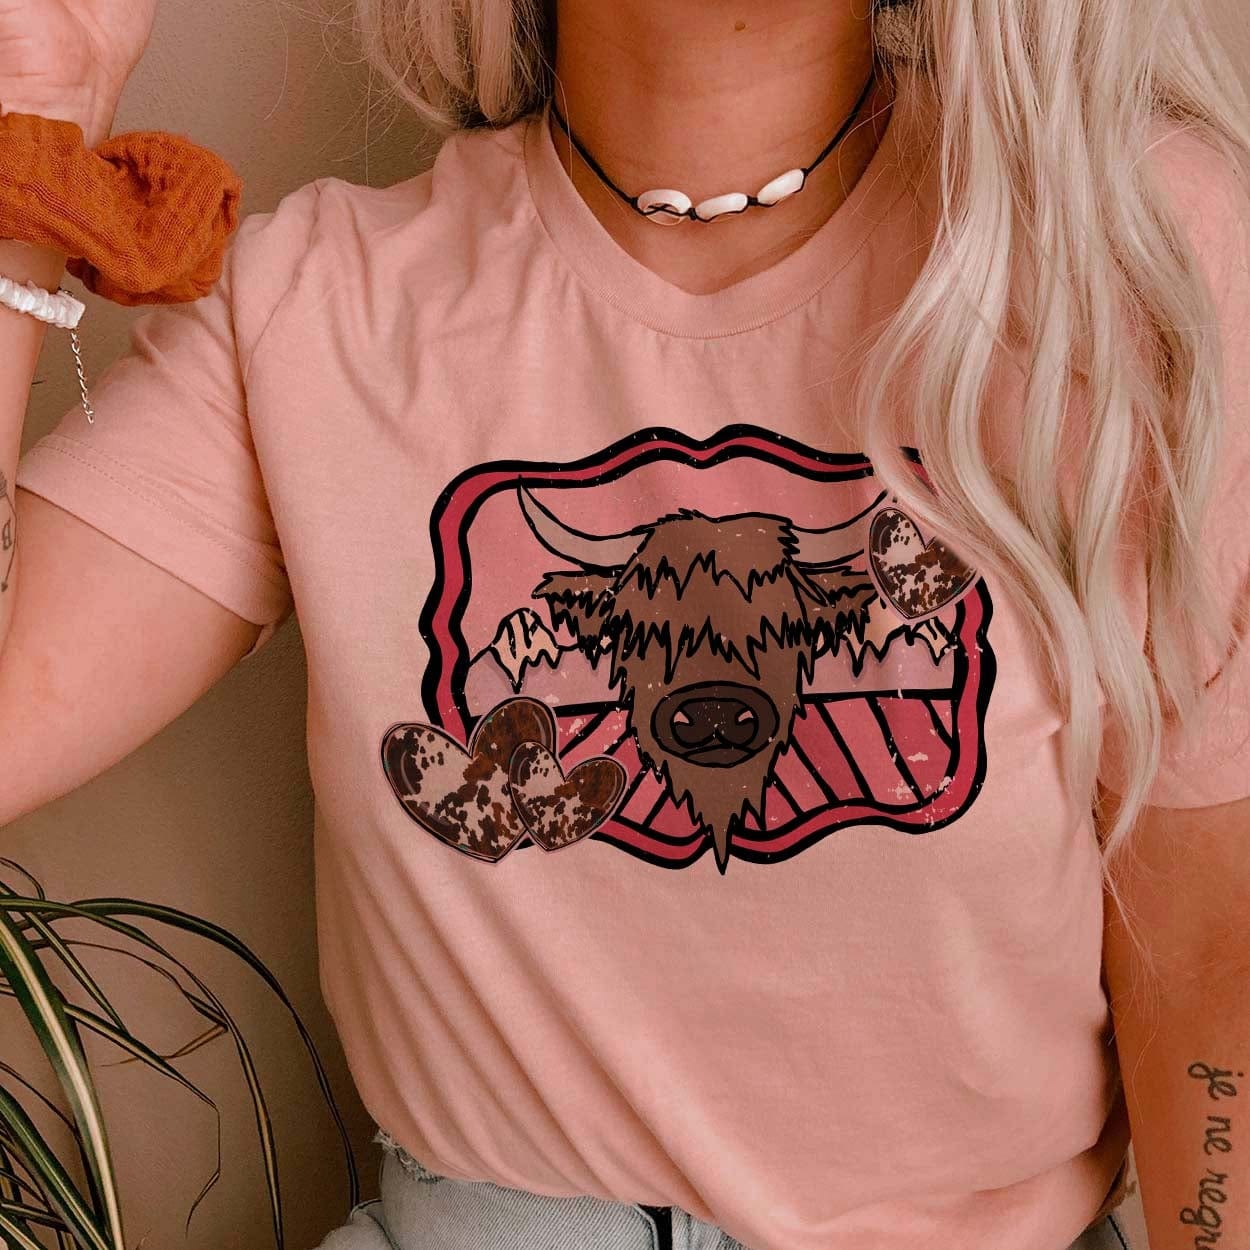 Model is wearing a rose pink tee shirt that has a highlander cow graphic on a mountain background with pink detailing and cowprint hearts. Model has it paired with a shell necklace, a rust scrunchie, and light wash jeans.